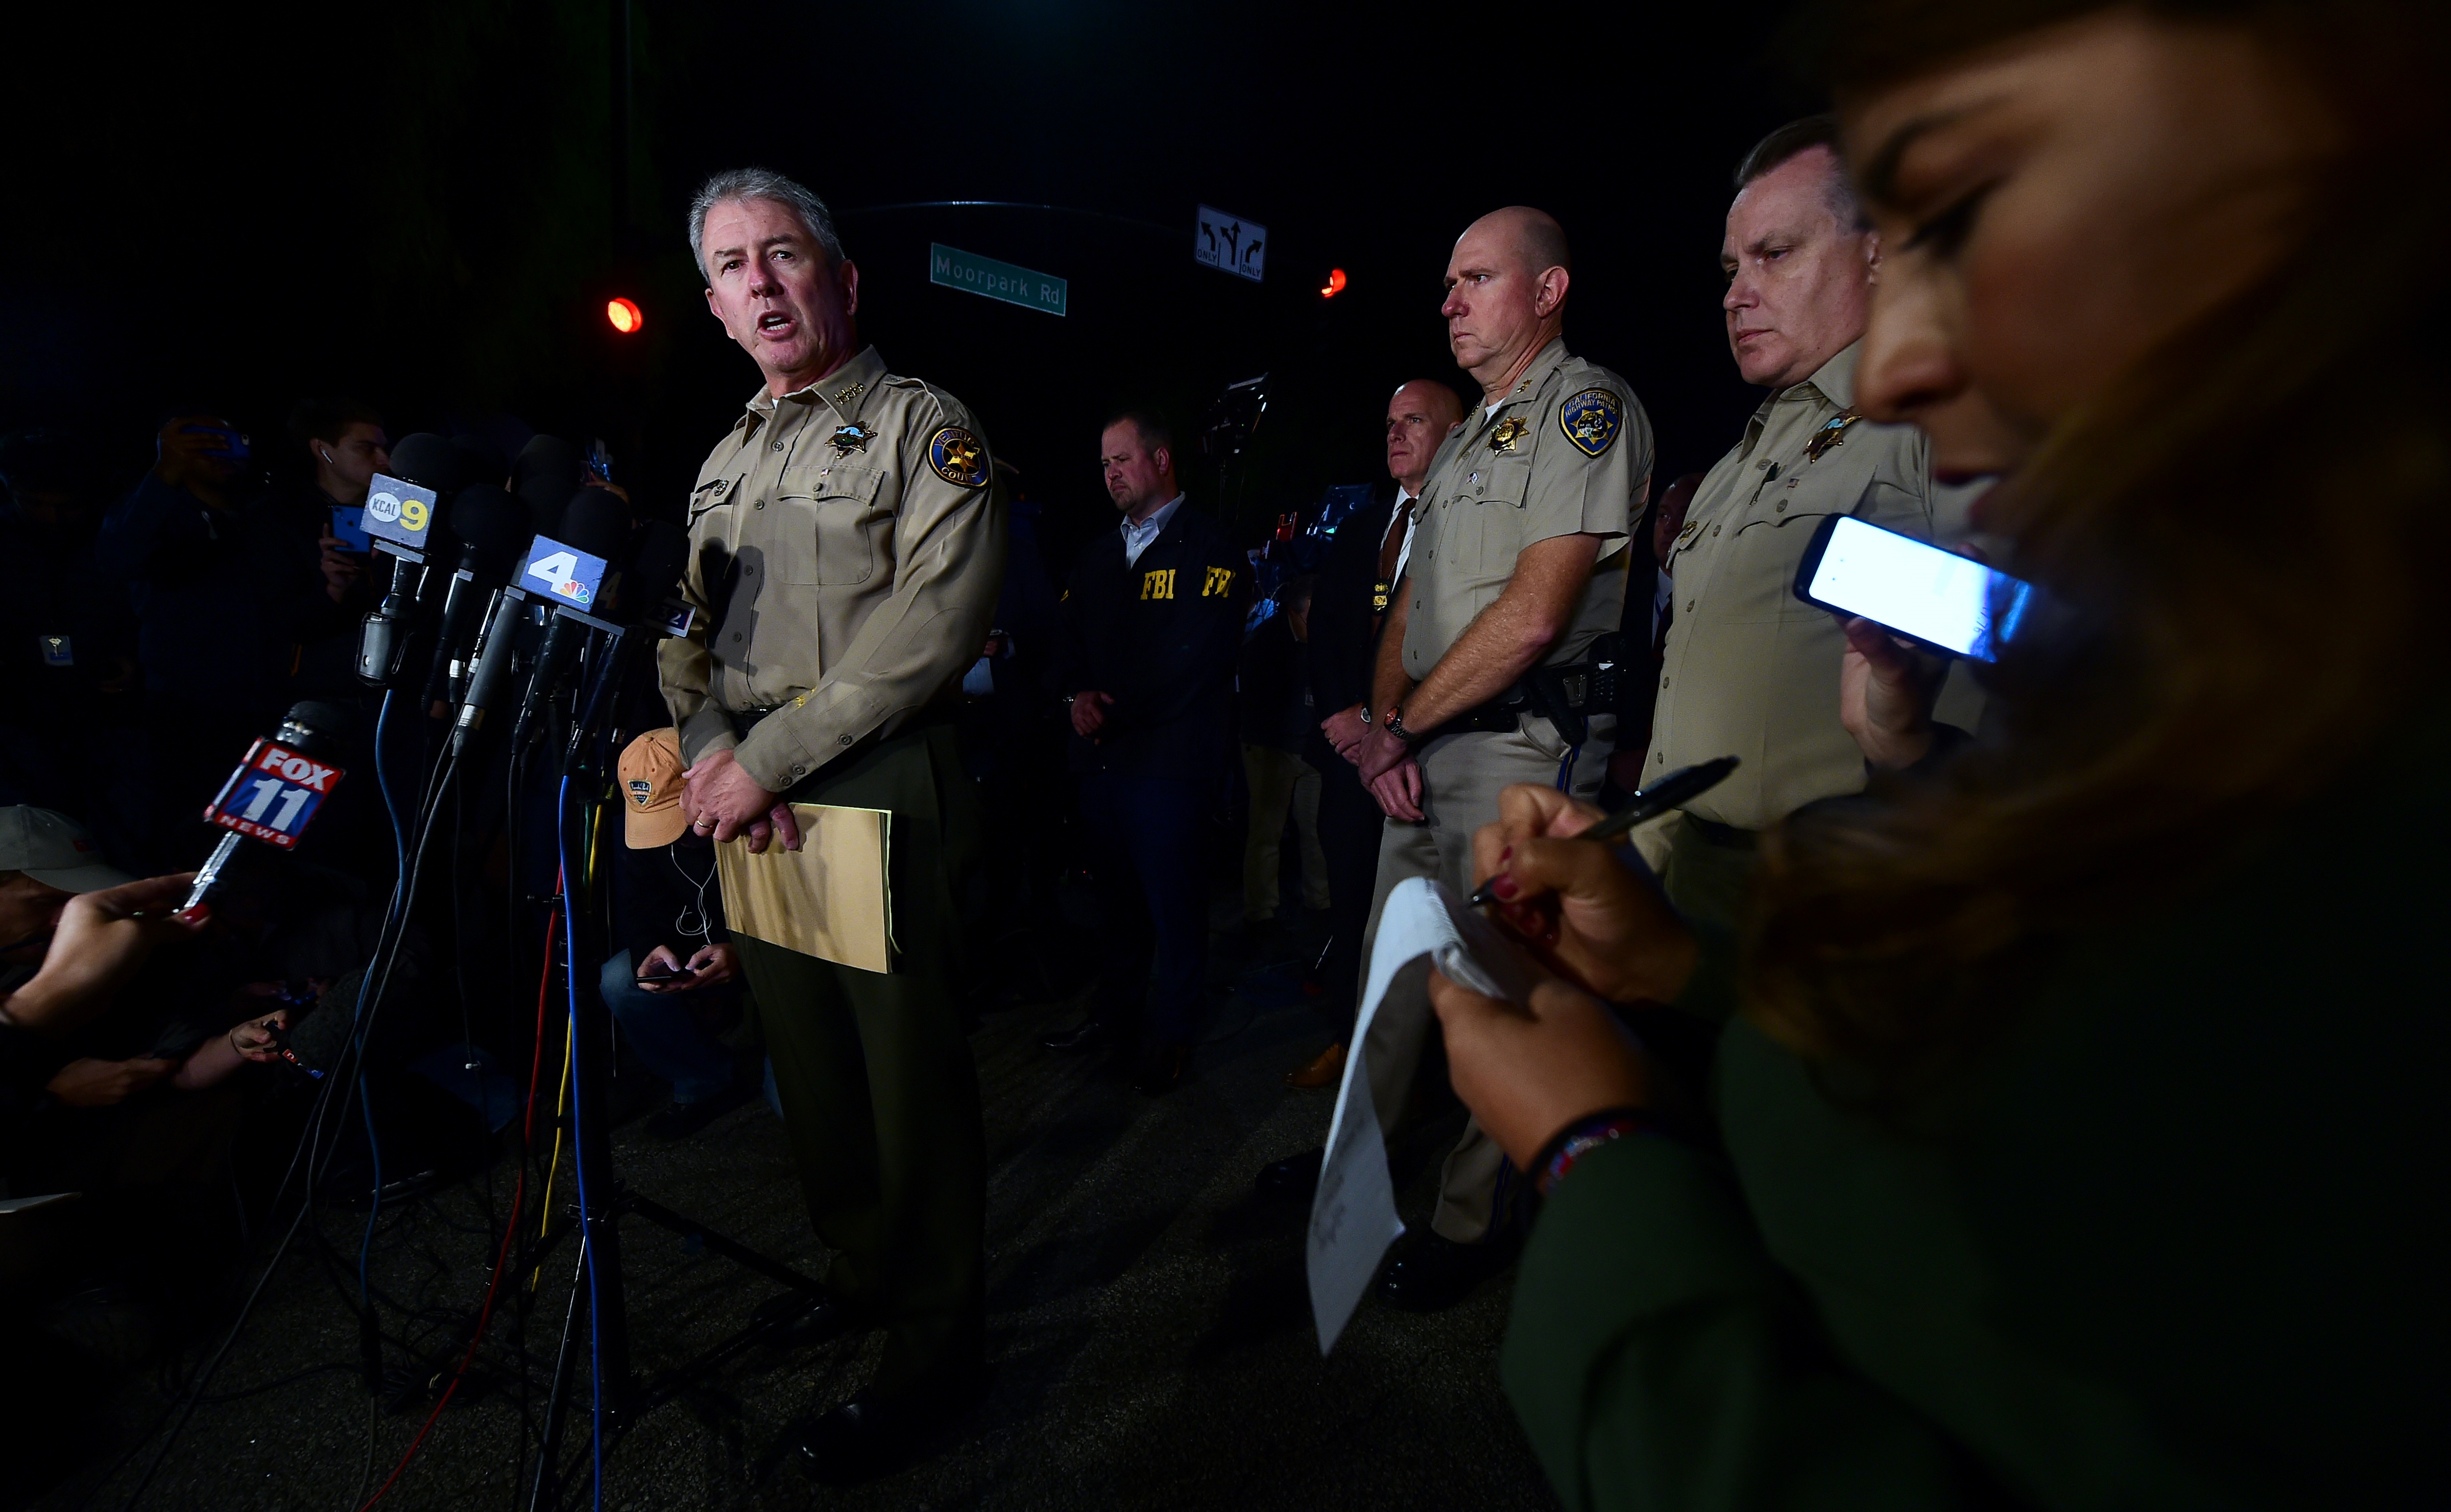 Ventura County Sheriff Geoff Dean briefs reporters at the intersection of US 101 freeway and the Moorpark Rad exit as police vehicles close off the area responding to a shooting at a bar in Thousand Oaks, California on November 8, 2018. - Twelve people, including a police sergeant, were shot dead in a shooting at a nighttclub close to Los Angeles, police said Thursday. All the victims were killed inside the bar in the suburb of Thousand Oaks late on Wednesday, including the officer who had been called to the scene, Sheriff Geoff Dean told reporters. The gunman was also dead at the scene, Dean added. The bar was hosting a college country music night. (Photo by Frederic J. BROWN / AFP) 